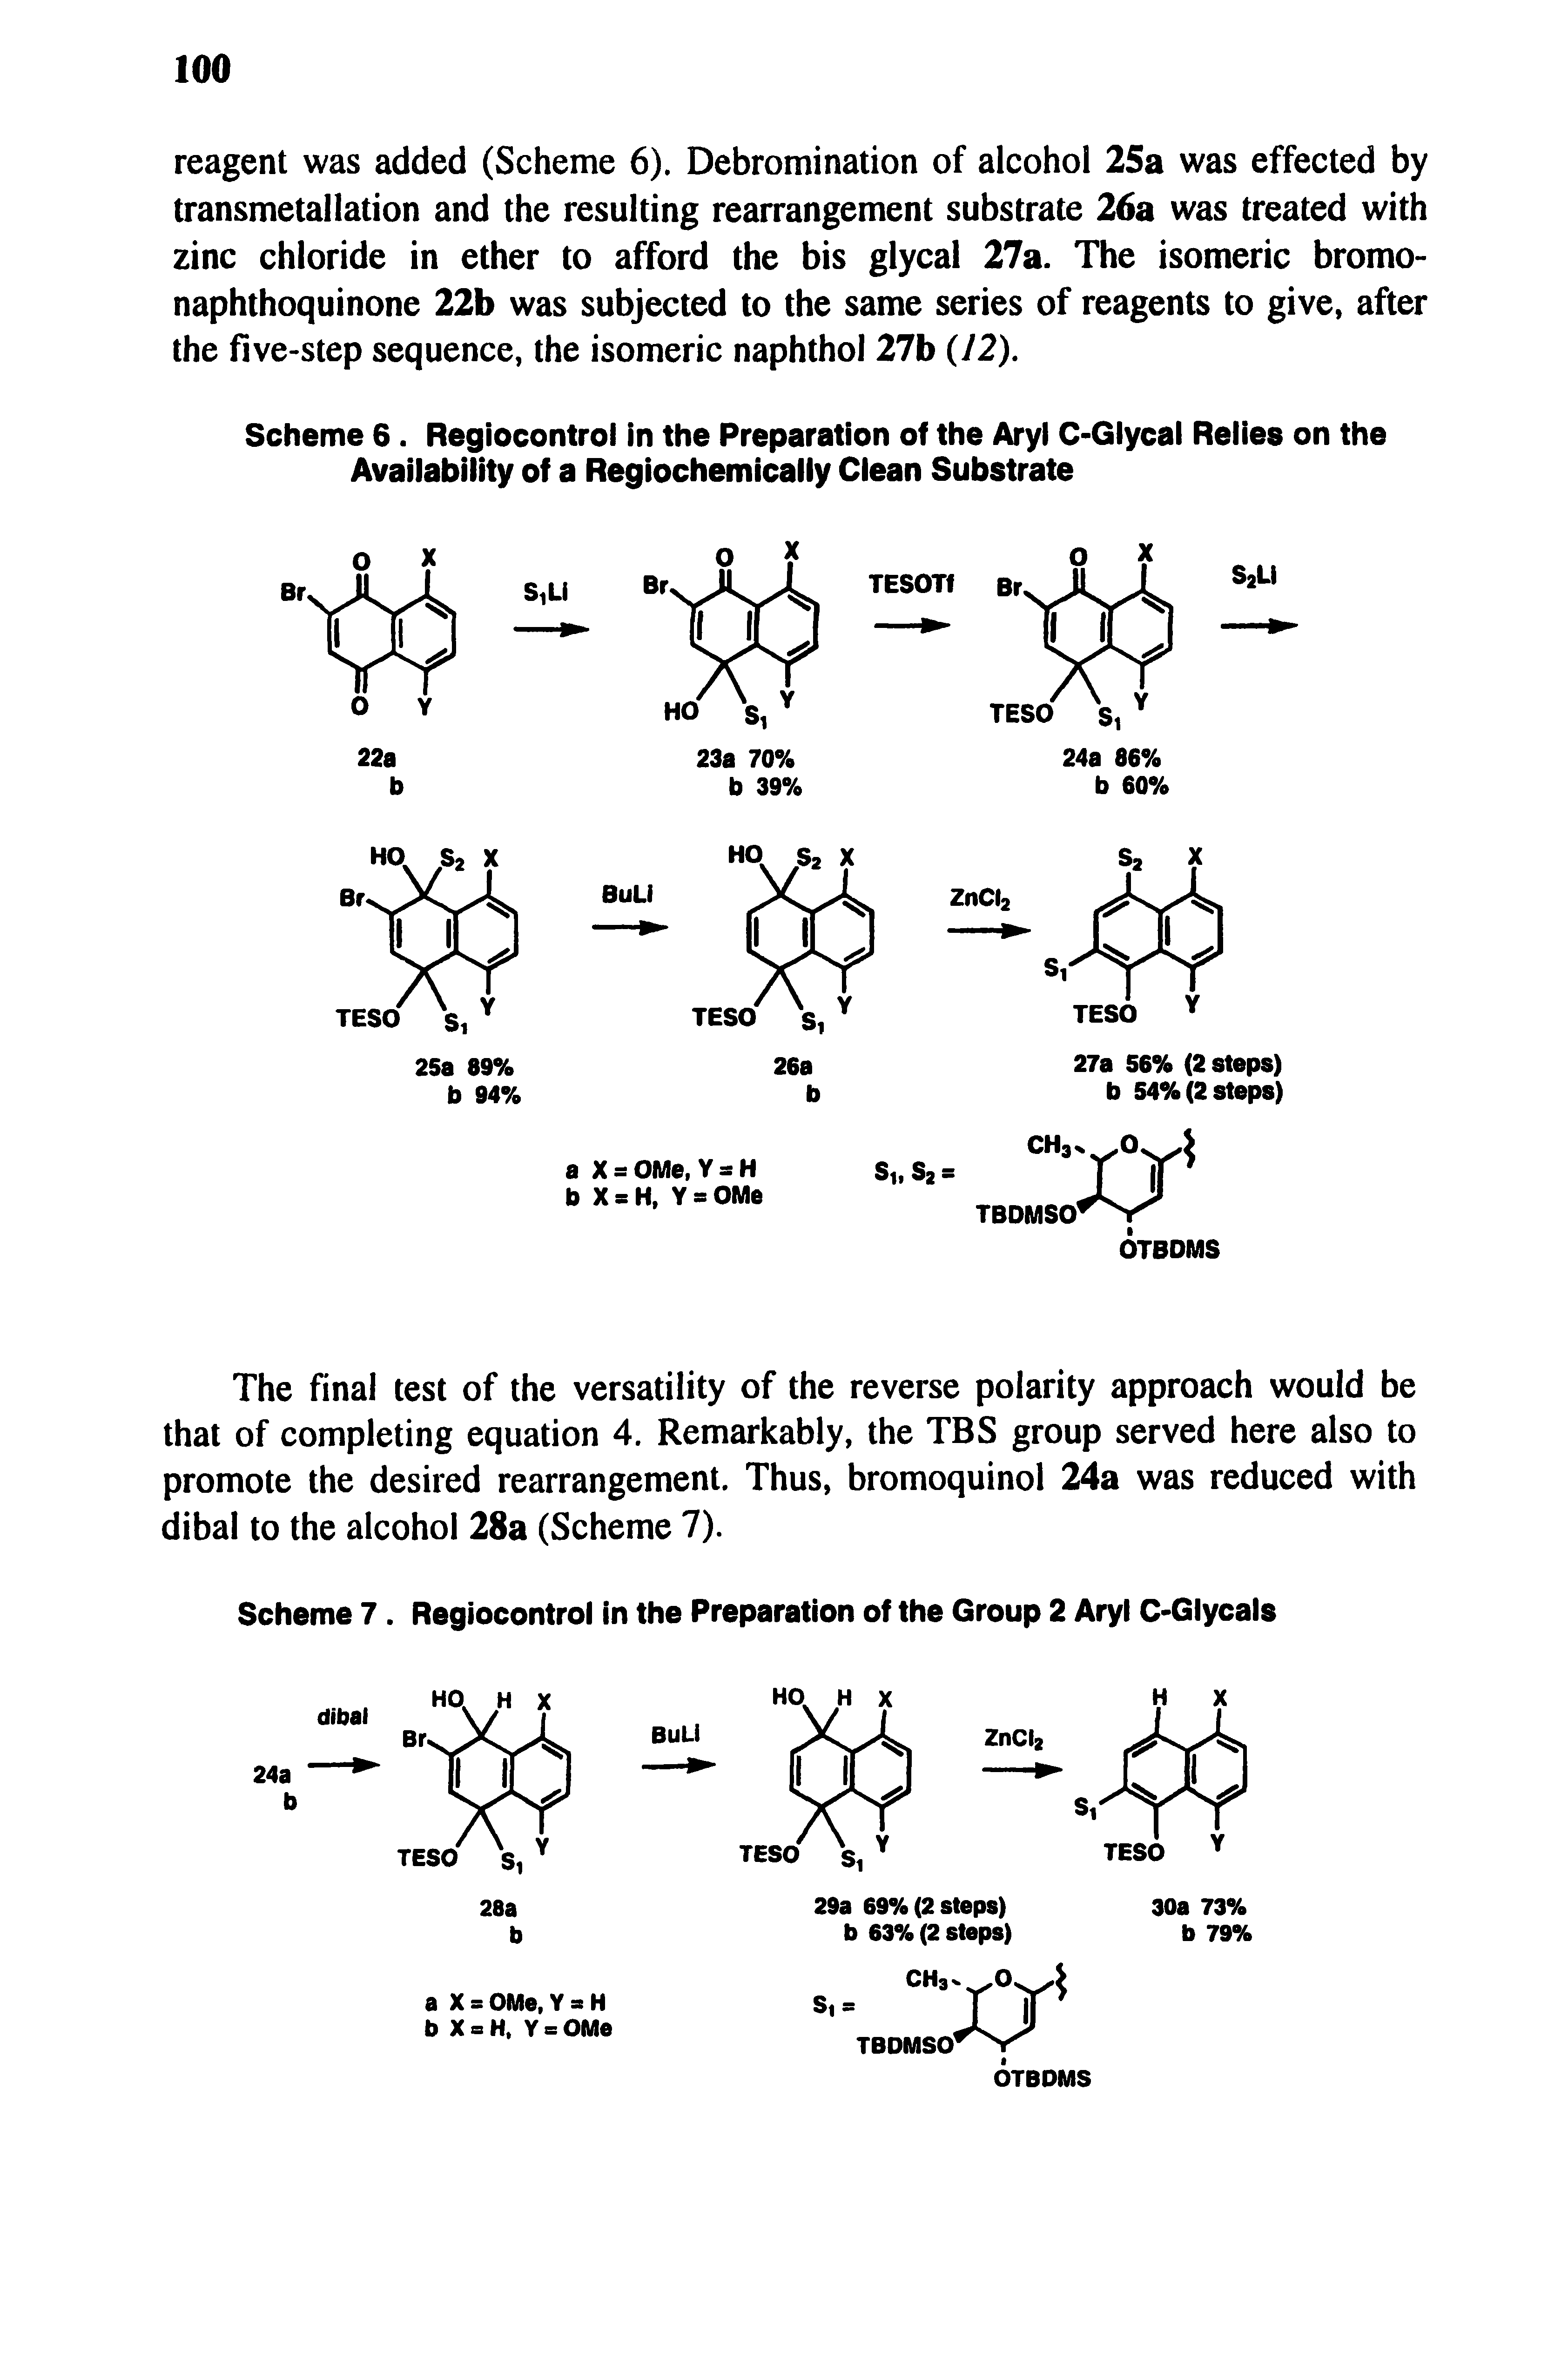 Scheme 6. Regiocontrol in the Preparation of the Aryl C-Glycal Relies on the Availability of a Regiochemically Clean Substrate...